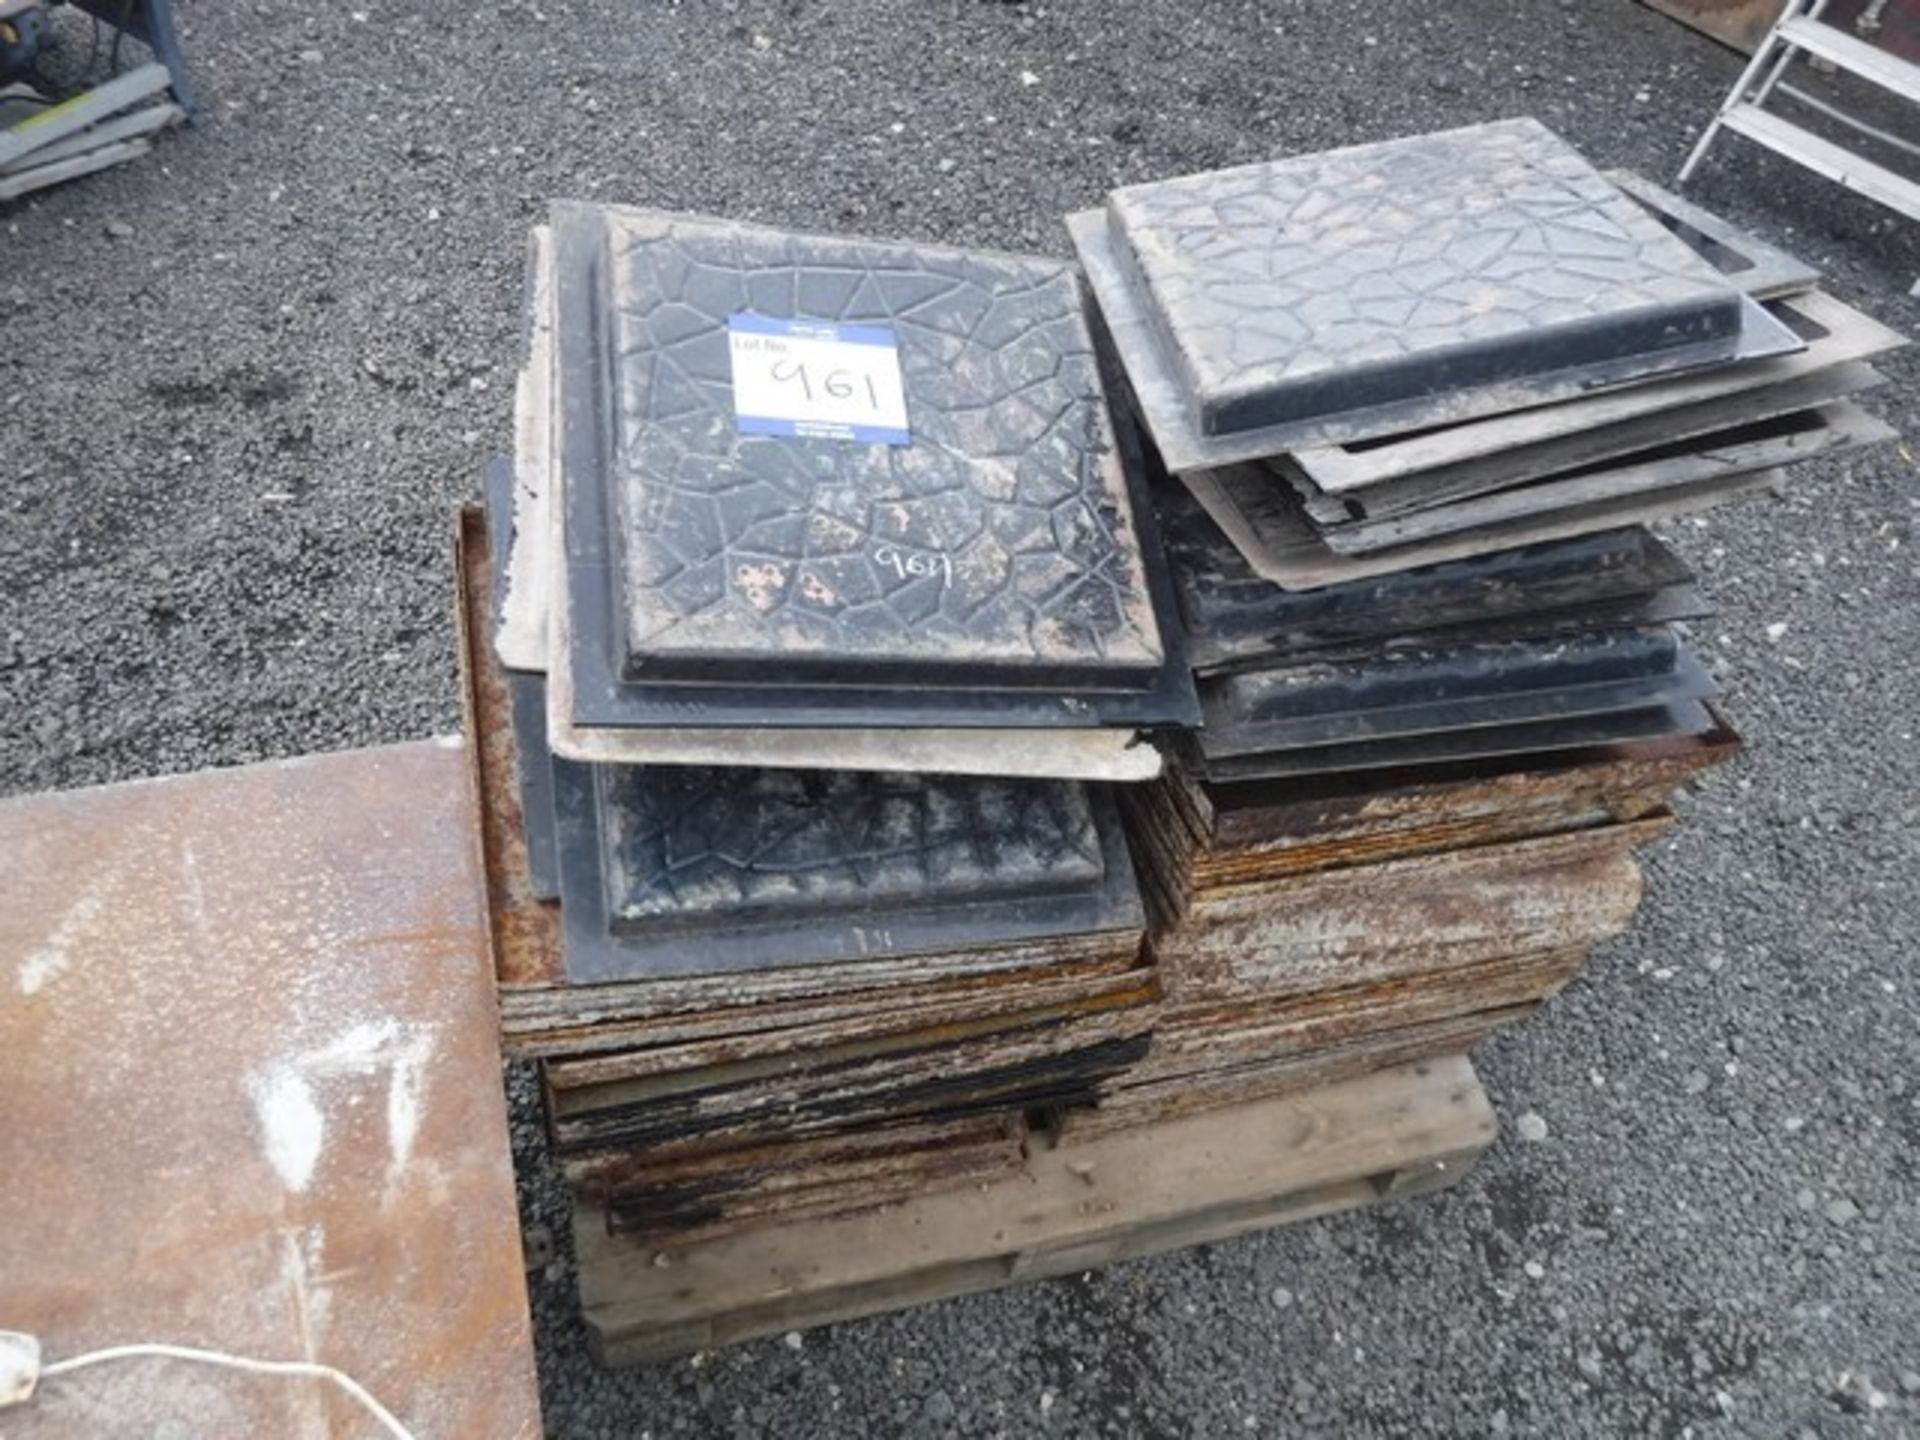 VIBRATING TABLE & LARGE SELECTION OF MOULDS, STEEL & FIBERGLASS ( KERBS, 2 X 2, 1.5 X 1.5 ORNAMENTAL - Image 3 of 3